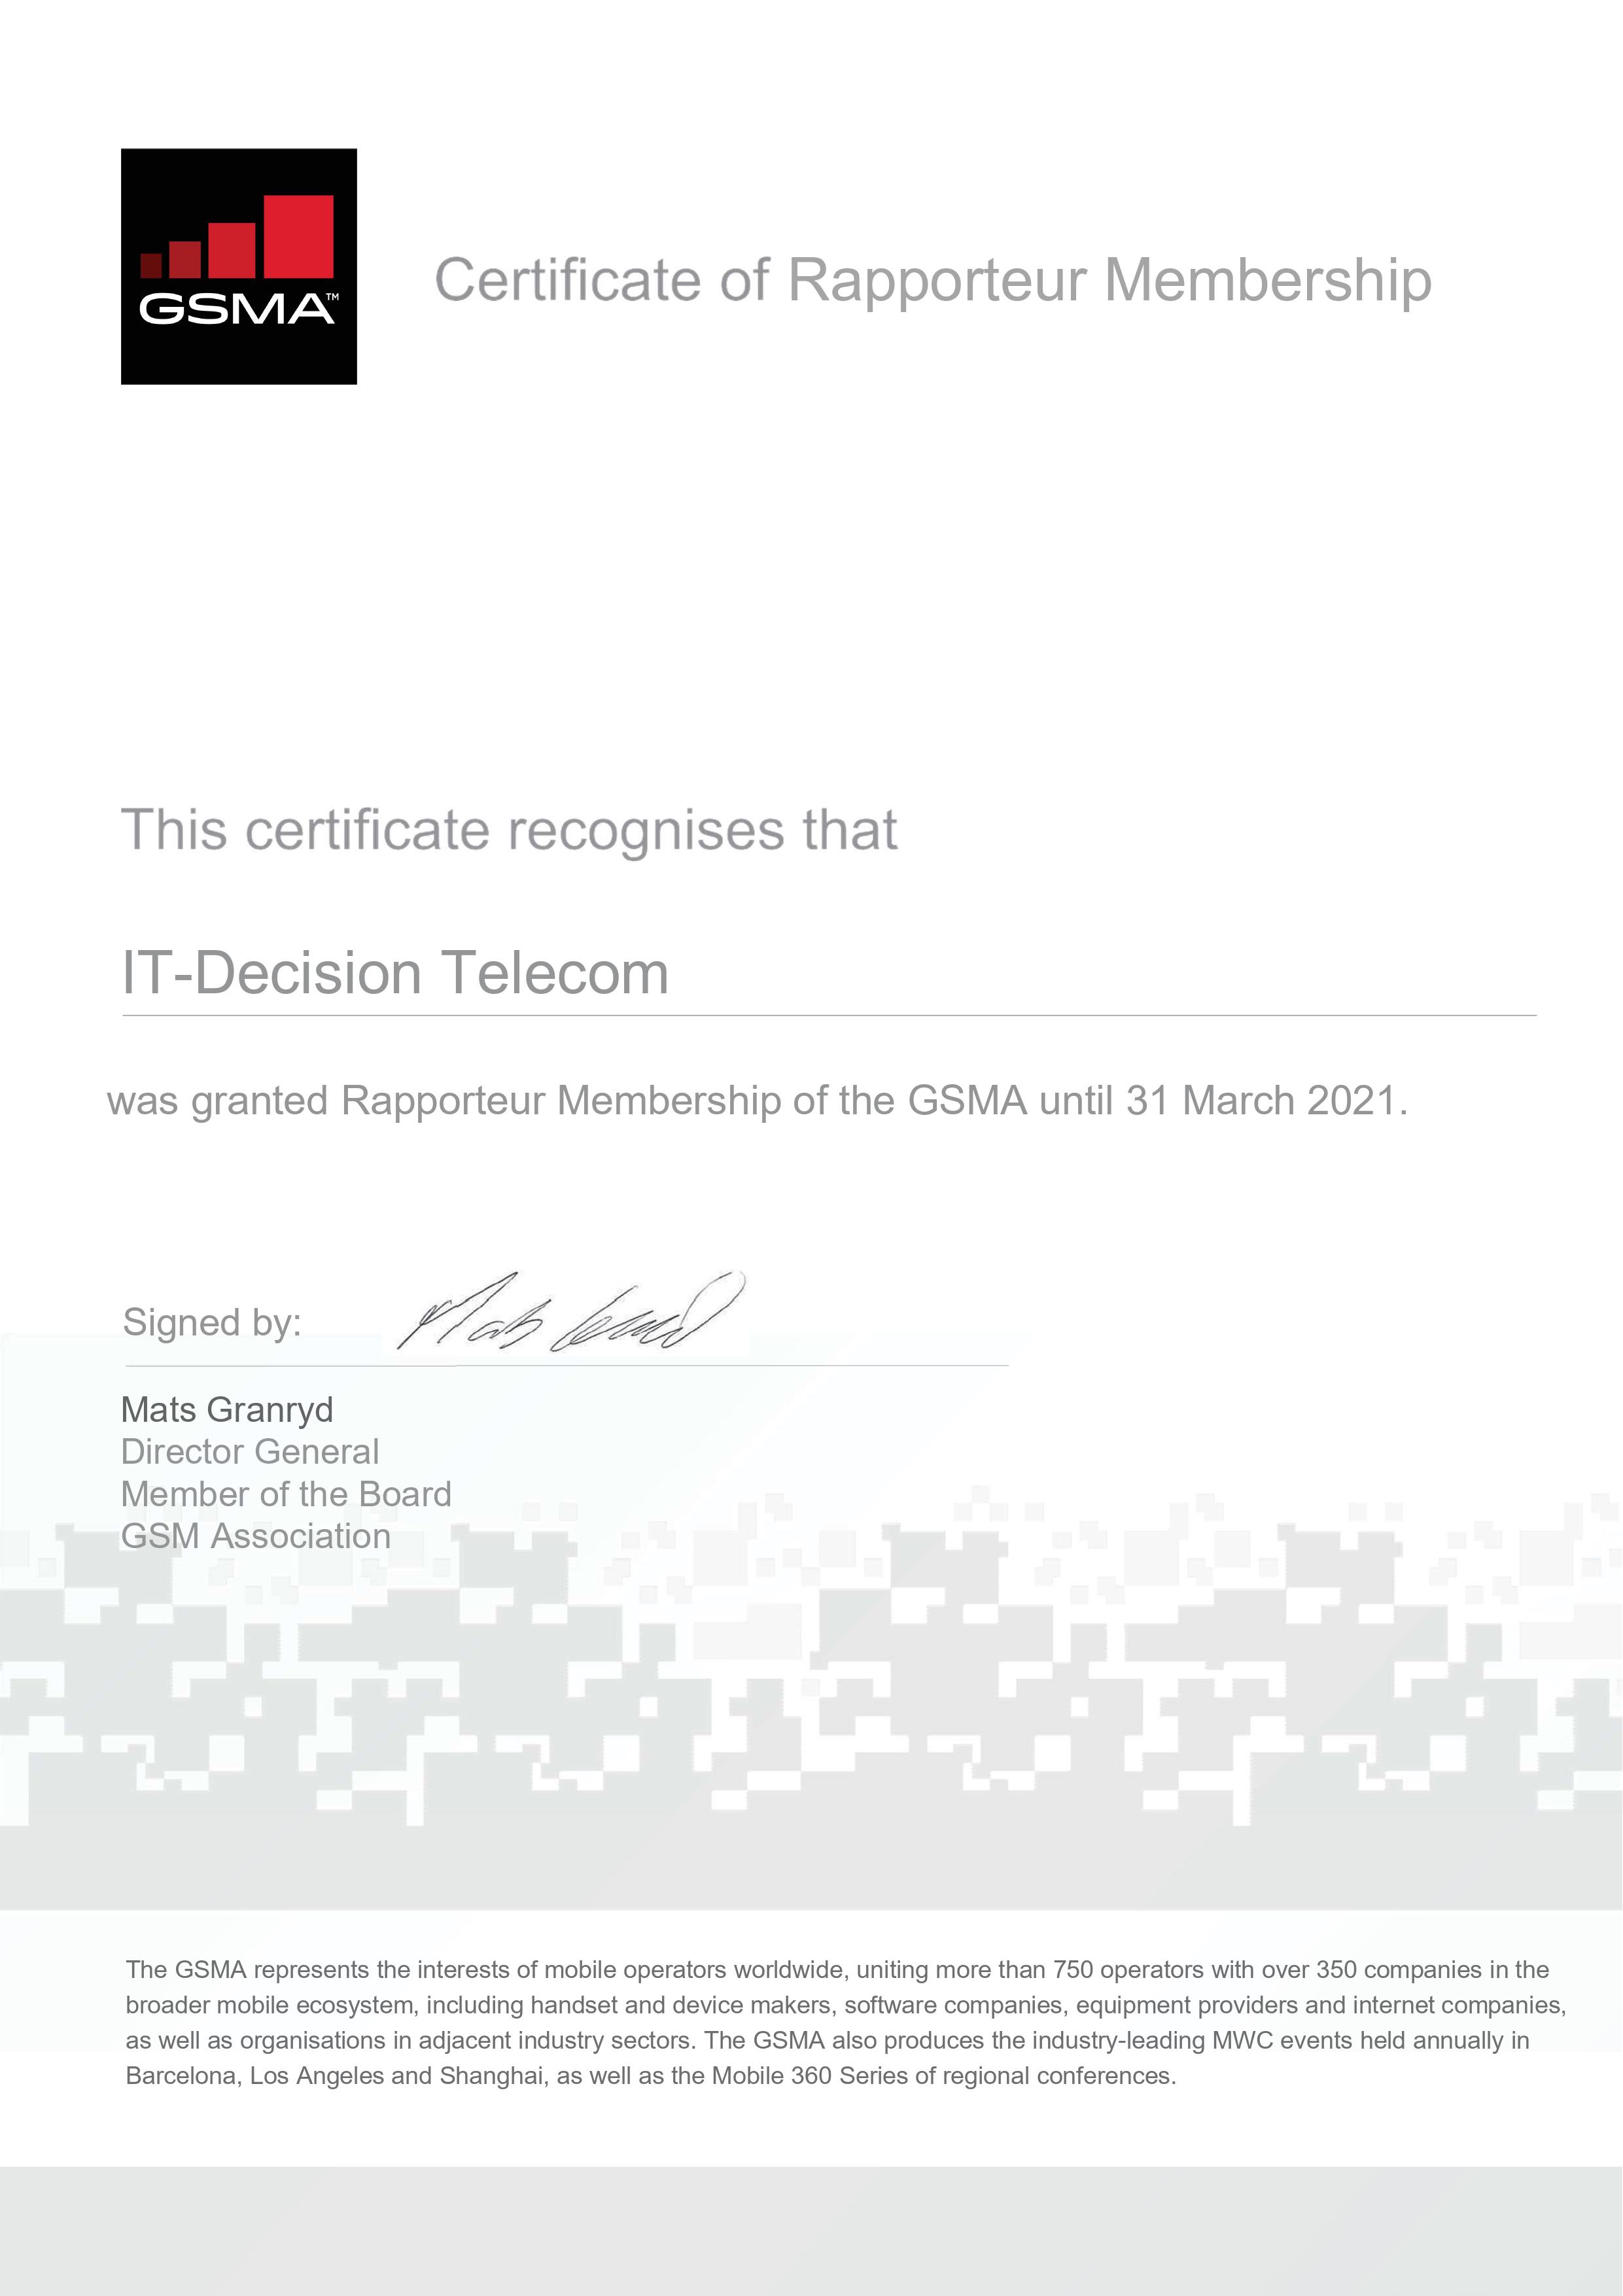 ITD Telecom was granted Rapporteur Membership of GSMA!